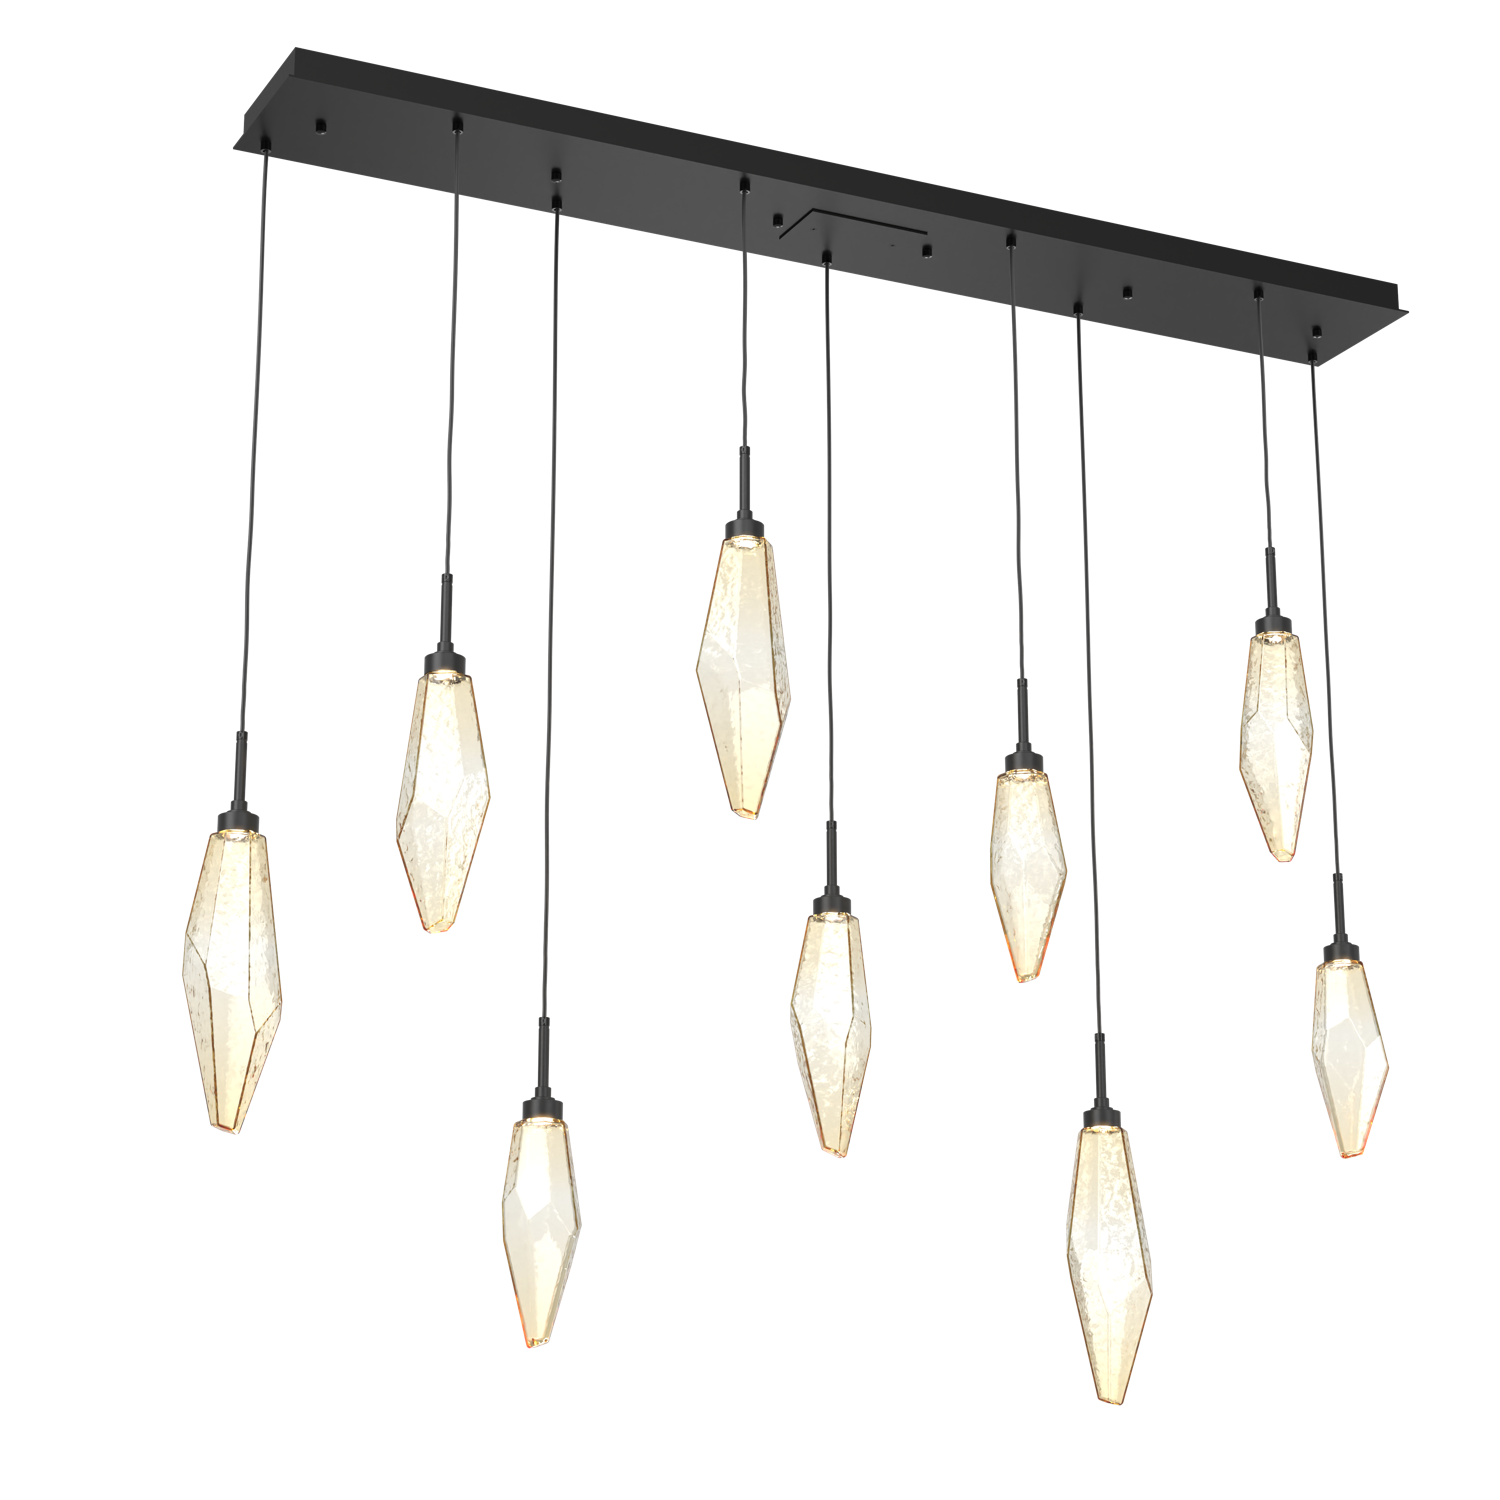 PLB0050-09-MB-CA-Hammerton-Studio-Rock-Crystal-9-light-linear-pendant-chandelier-with-matte-black-finish-and-chilled-amber-blown-glass-shades-and-LED-lamping